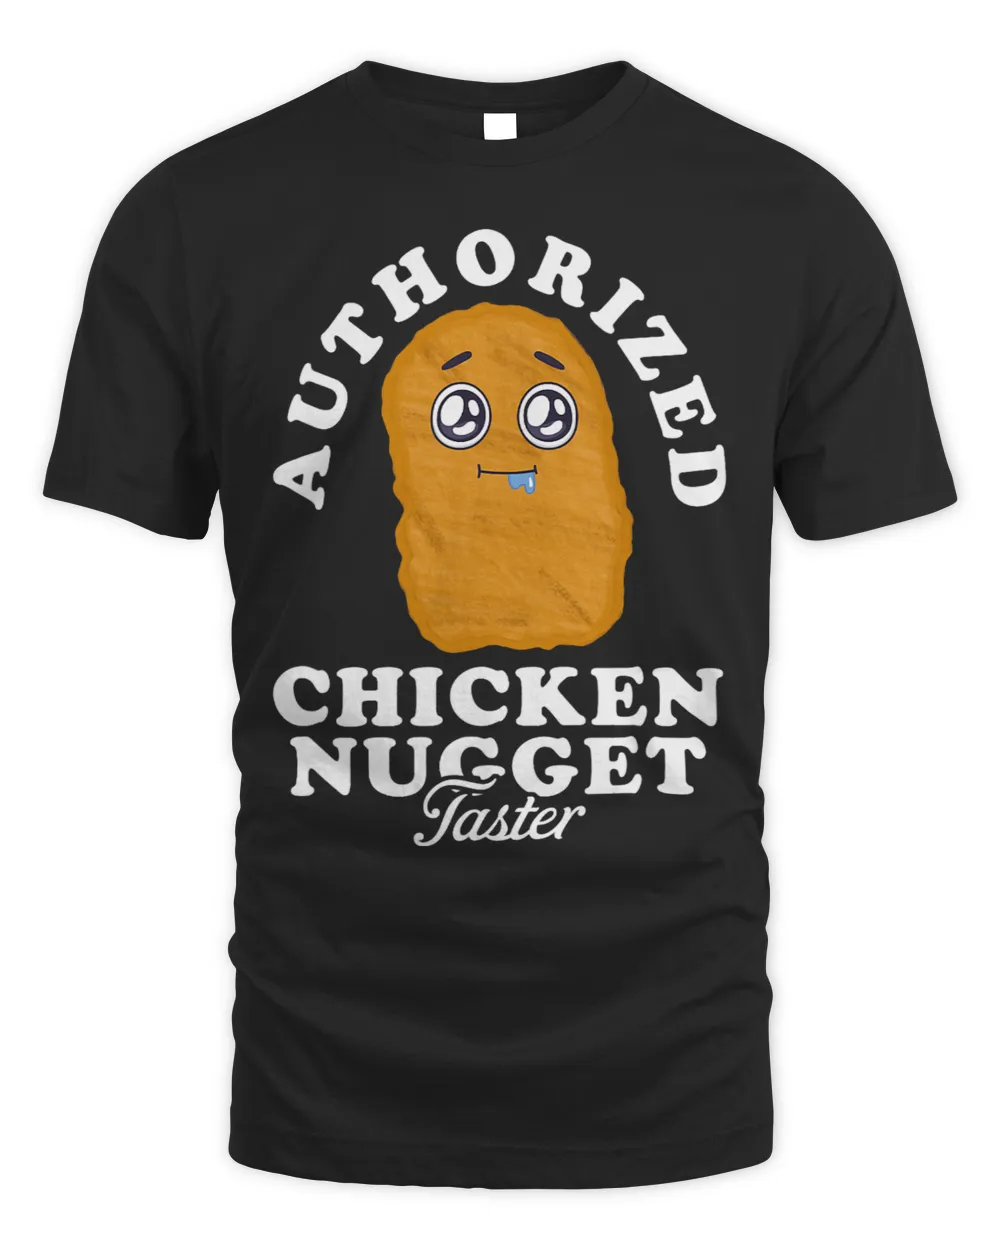 Chicken Poultry Funny Chicken Nuggets Pun Authorized Chicken Nugget Taster